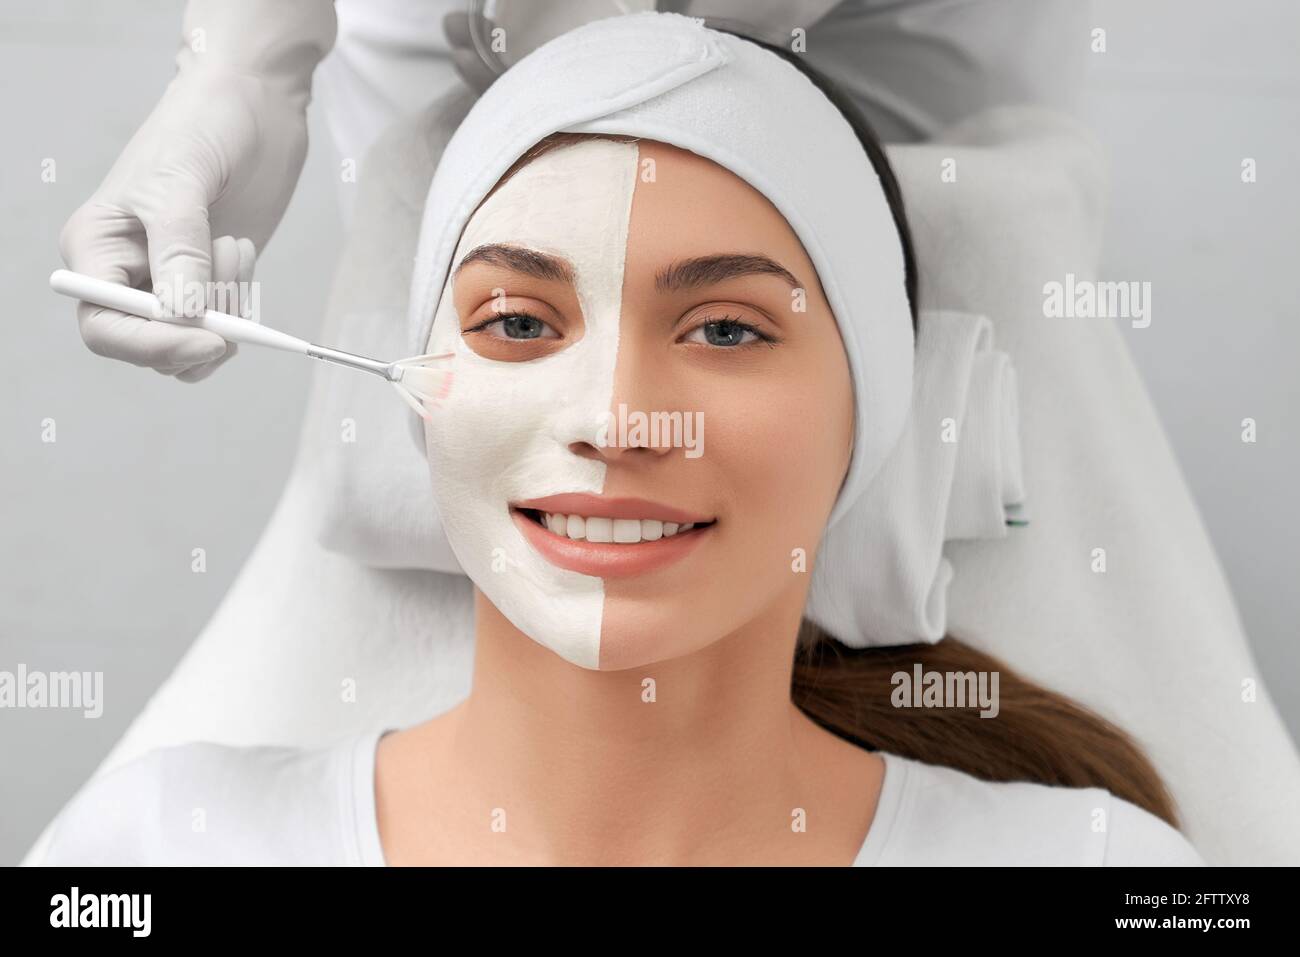 Portrait of smiling young woman lying in beauty salon and beautician applying special white mask on face. Concept of procedure for rejuvenation skin or improvements. Stock Photo